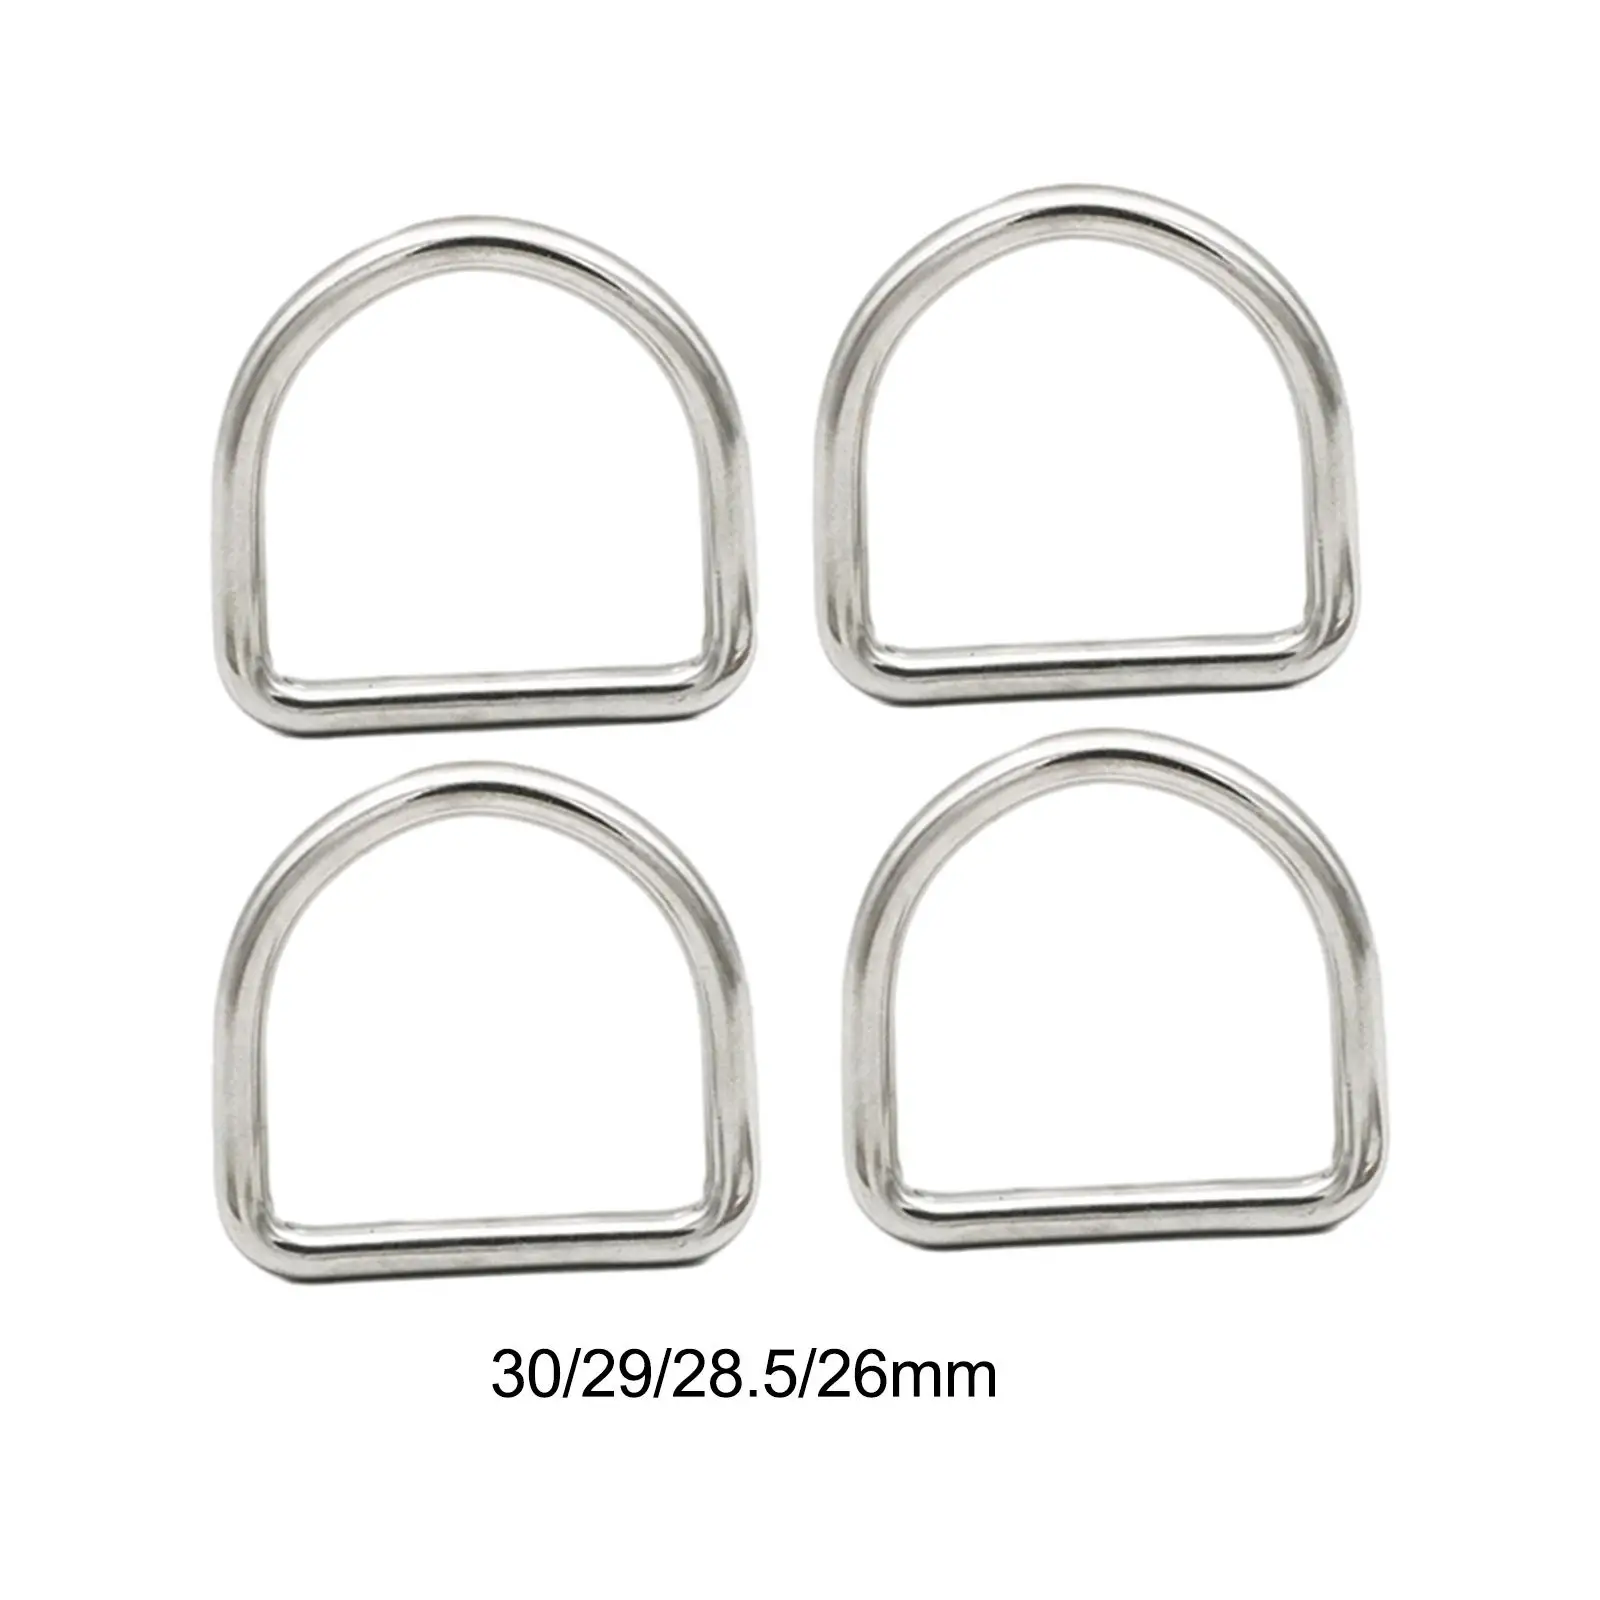 4 Pieces Welded Heavy D Rings D Shape Rings Solid Cast Metal Loops Buckles D Shape Buckle for Hardware Bags Ring Straps Ties